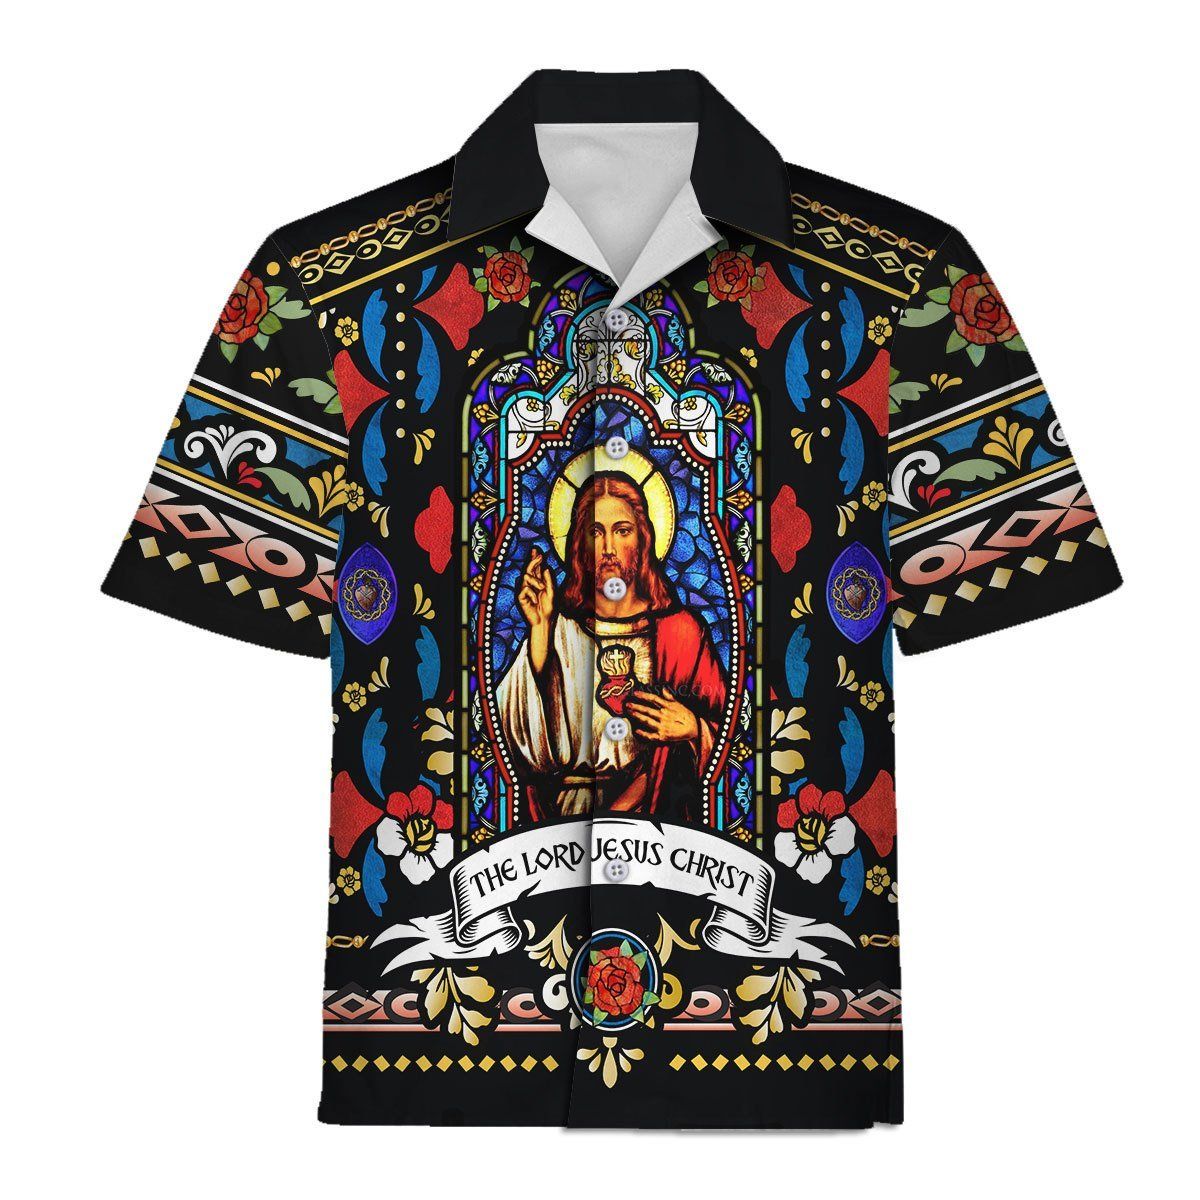 The Lord Jesus Christ Stained Glass Hawaiian Shirt